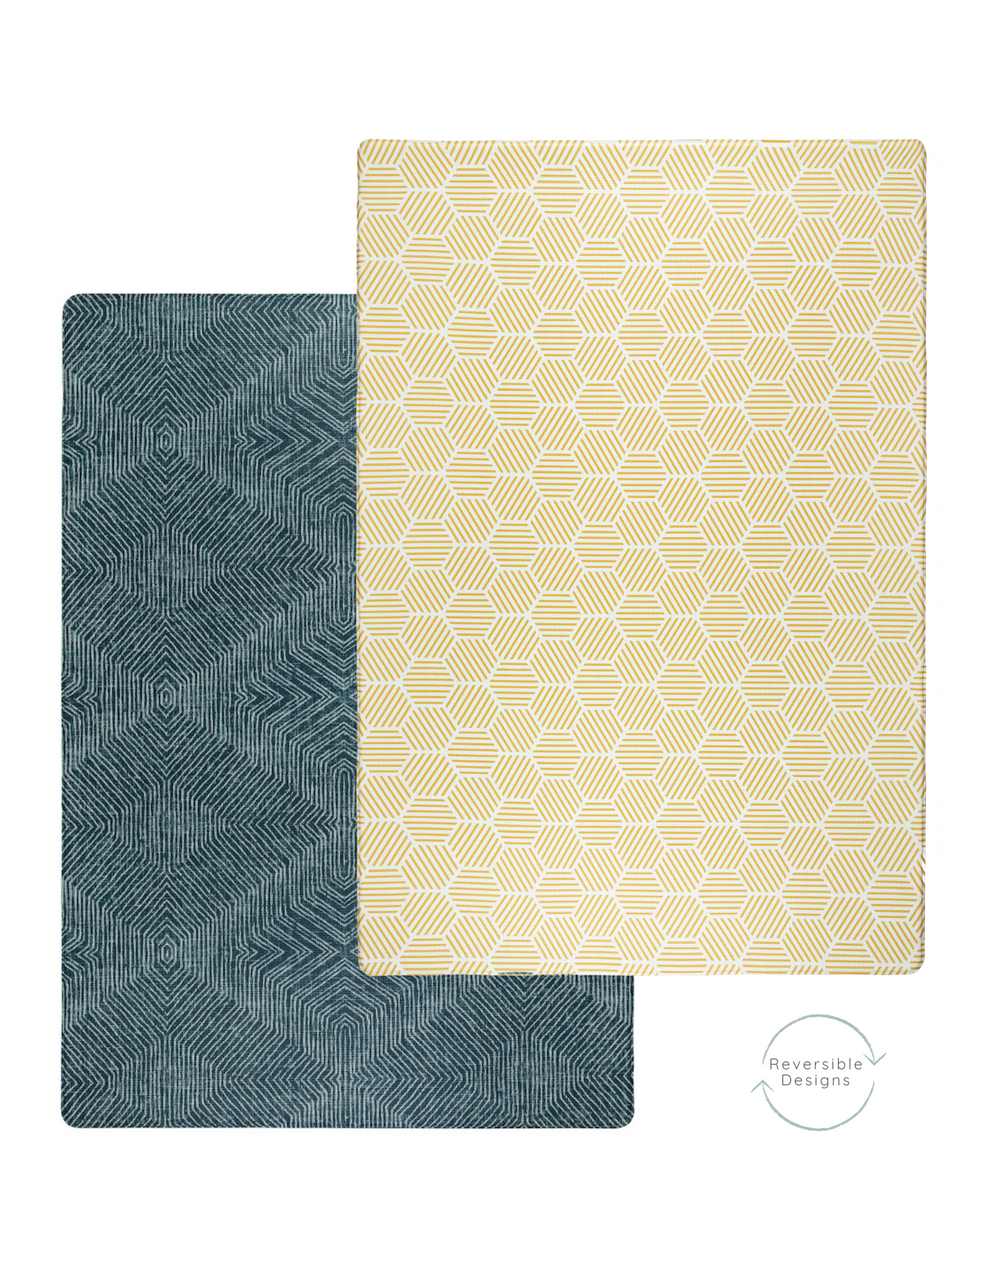 Reversible double sided playmat with two different styles so you have more choice